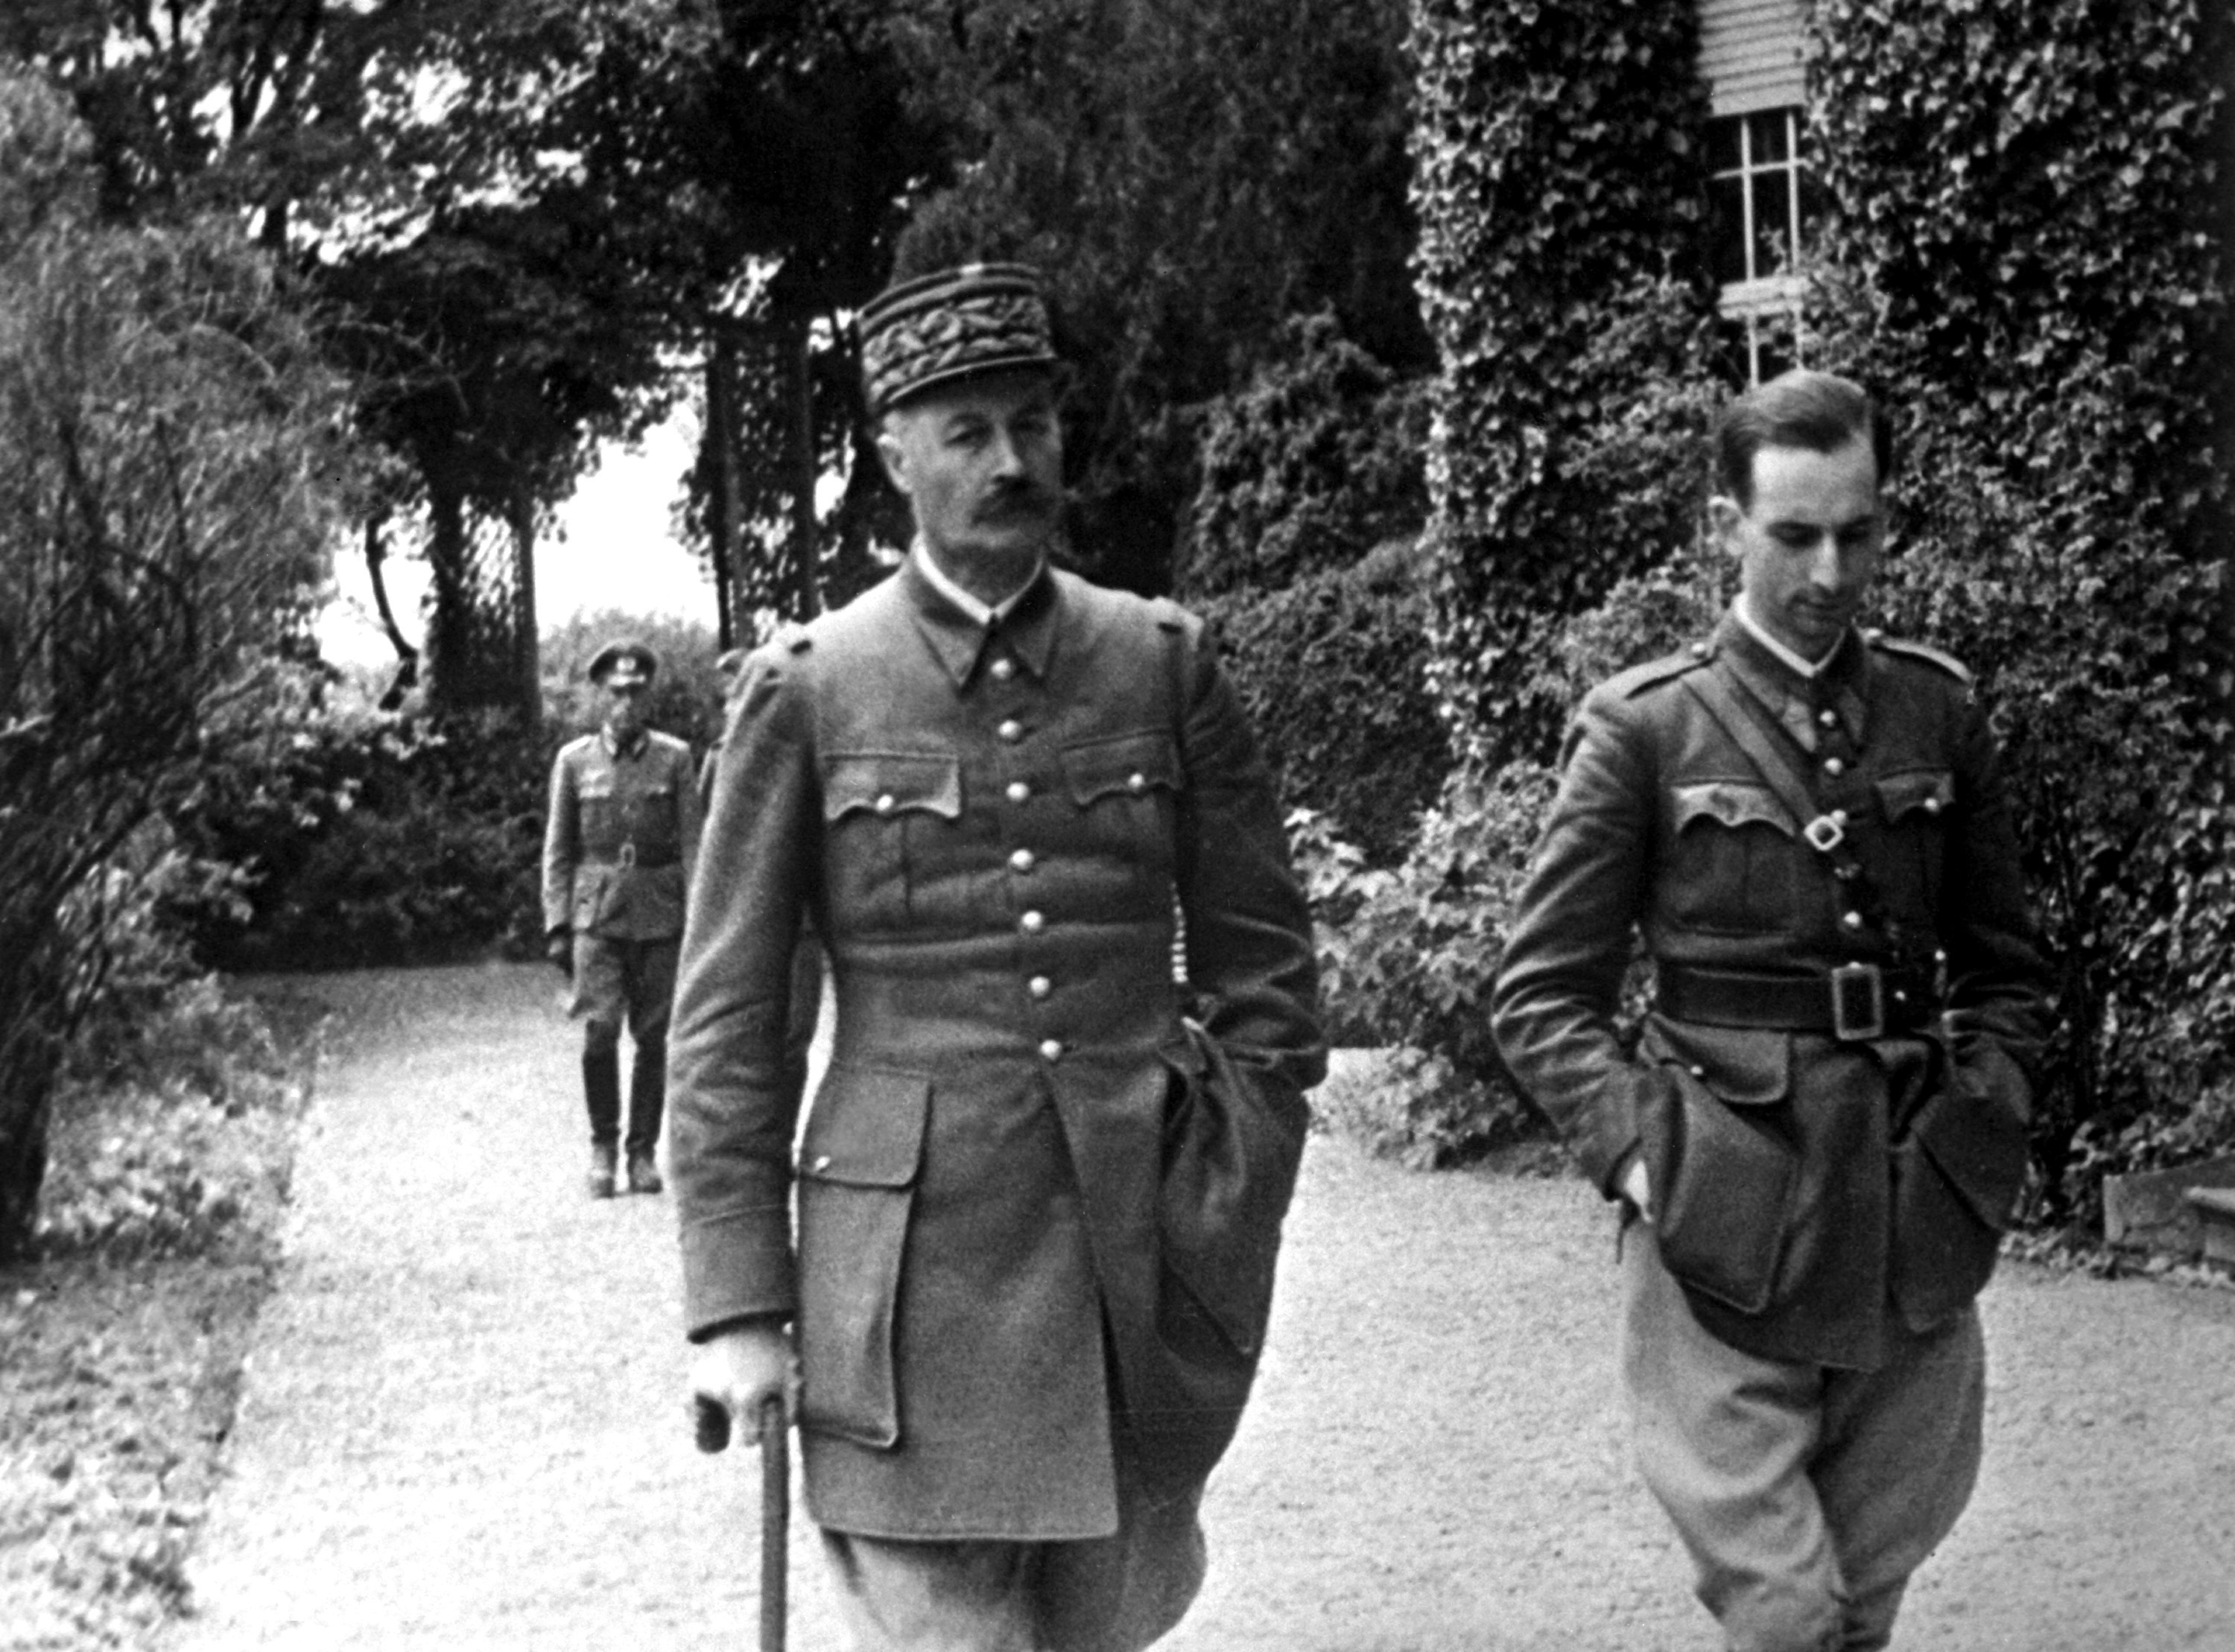 Captured French Army General Giraud taking a walk in the garden of the house in which he was imprisoned, Germany, circa 1940-1941